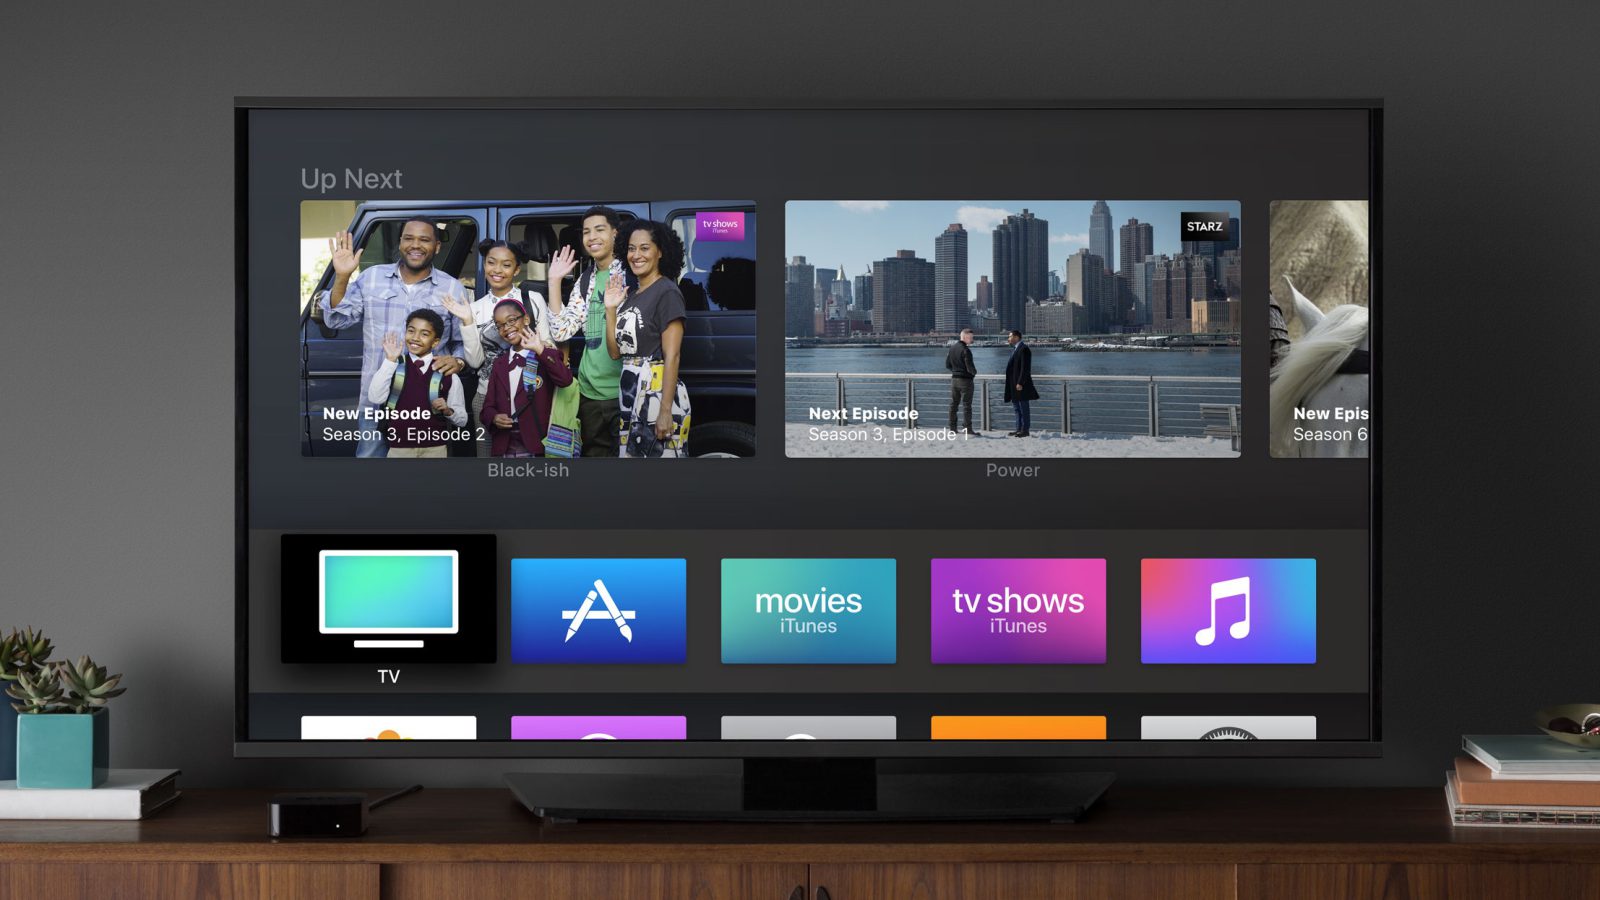 Free Apple TV with purchase of DirecTV Now service